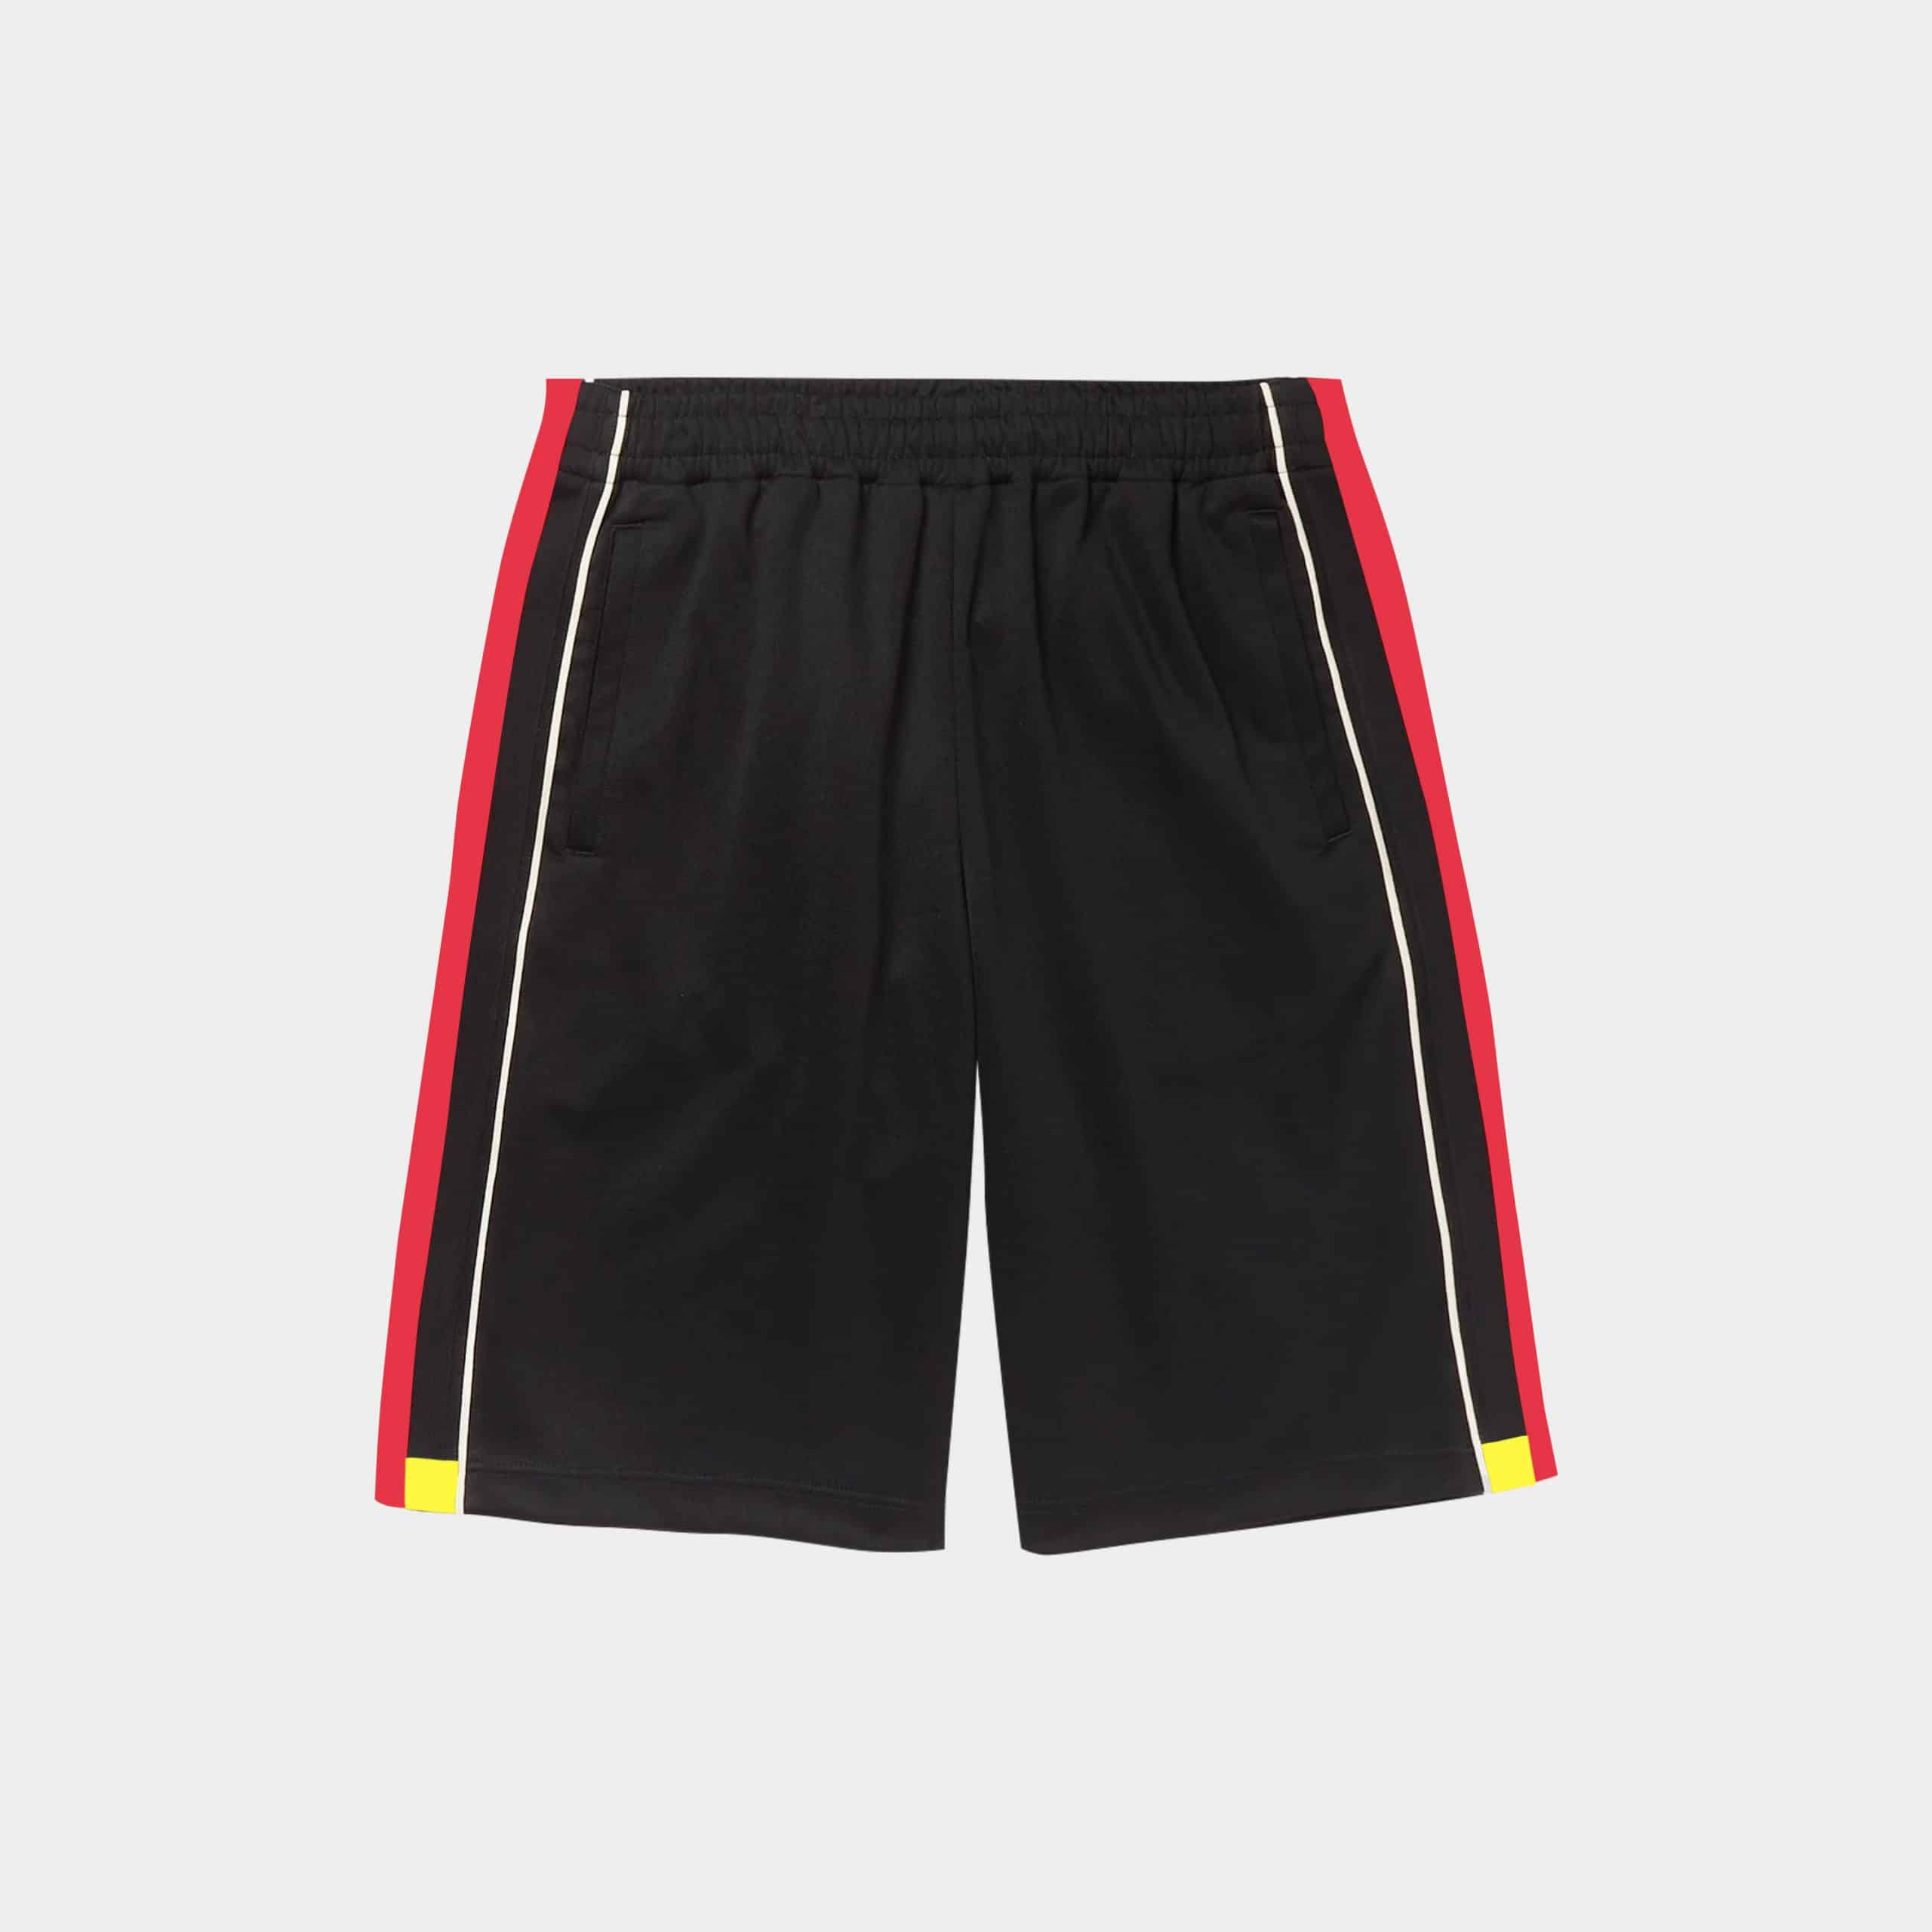 Flash Hero Look with this Smart Black Shorts with Red Side Panel Details-RKFCBS009